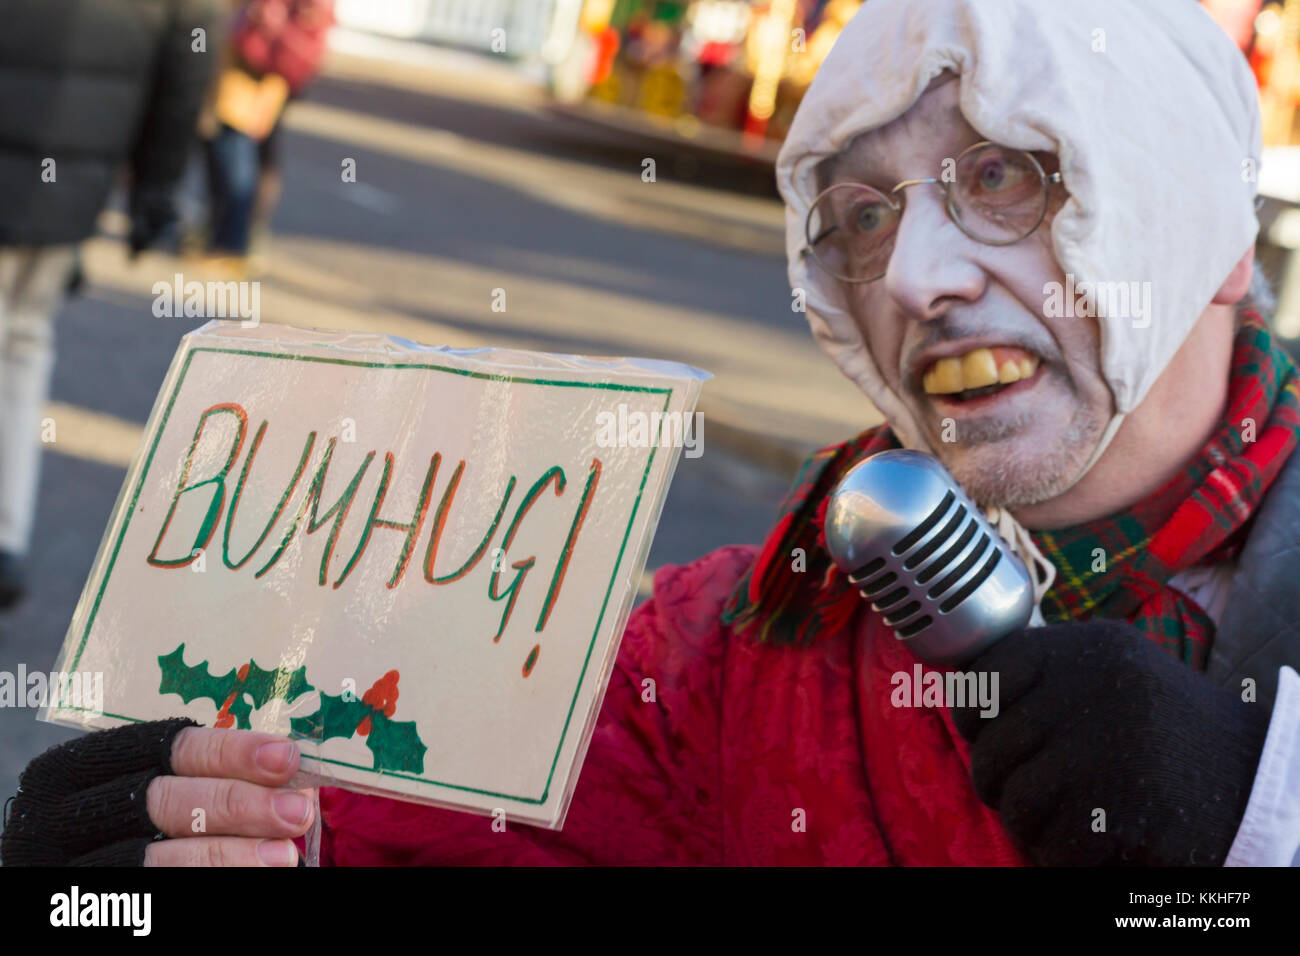 Portsmouth, Hampshire, UK. 1st Dec 2017. Crowds visit the Victorian Festival of Christmas at Portsmouth Historic Dockyard for the entertainment, characters dressed in olden days and the Christmas market. Ebenezer Scrooge holds bumhug sign. Credit: Carolyn Jenkins/Alamy Live News Stock Photo